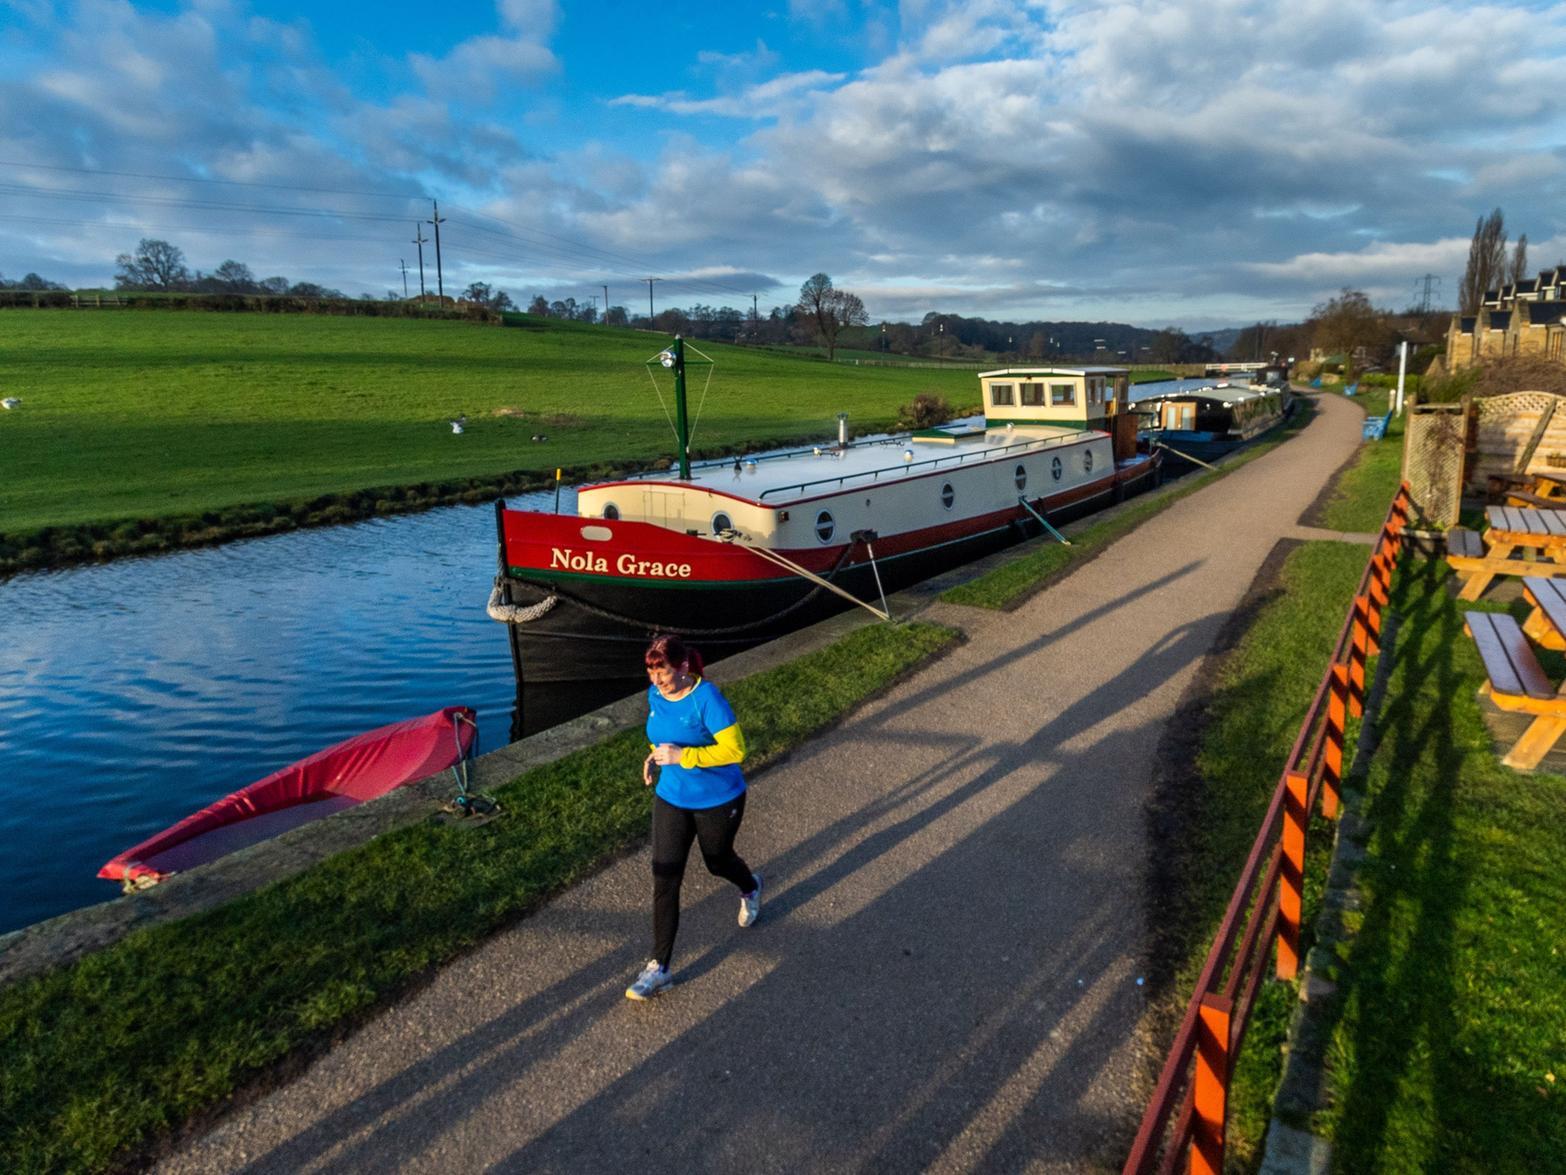 Located close to our #1 on the list, Calverley boasts beautiful canals and top cycling and walking spots